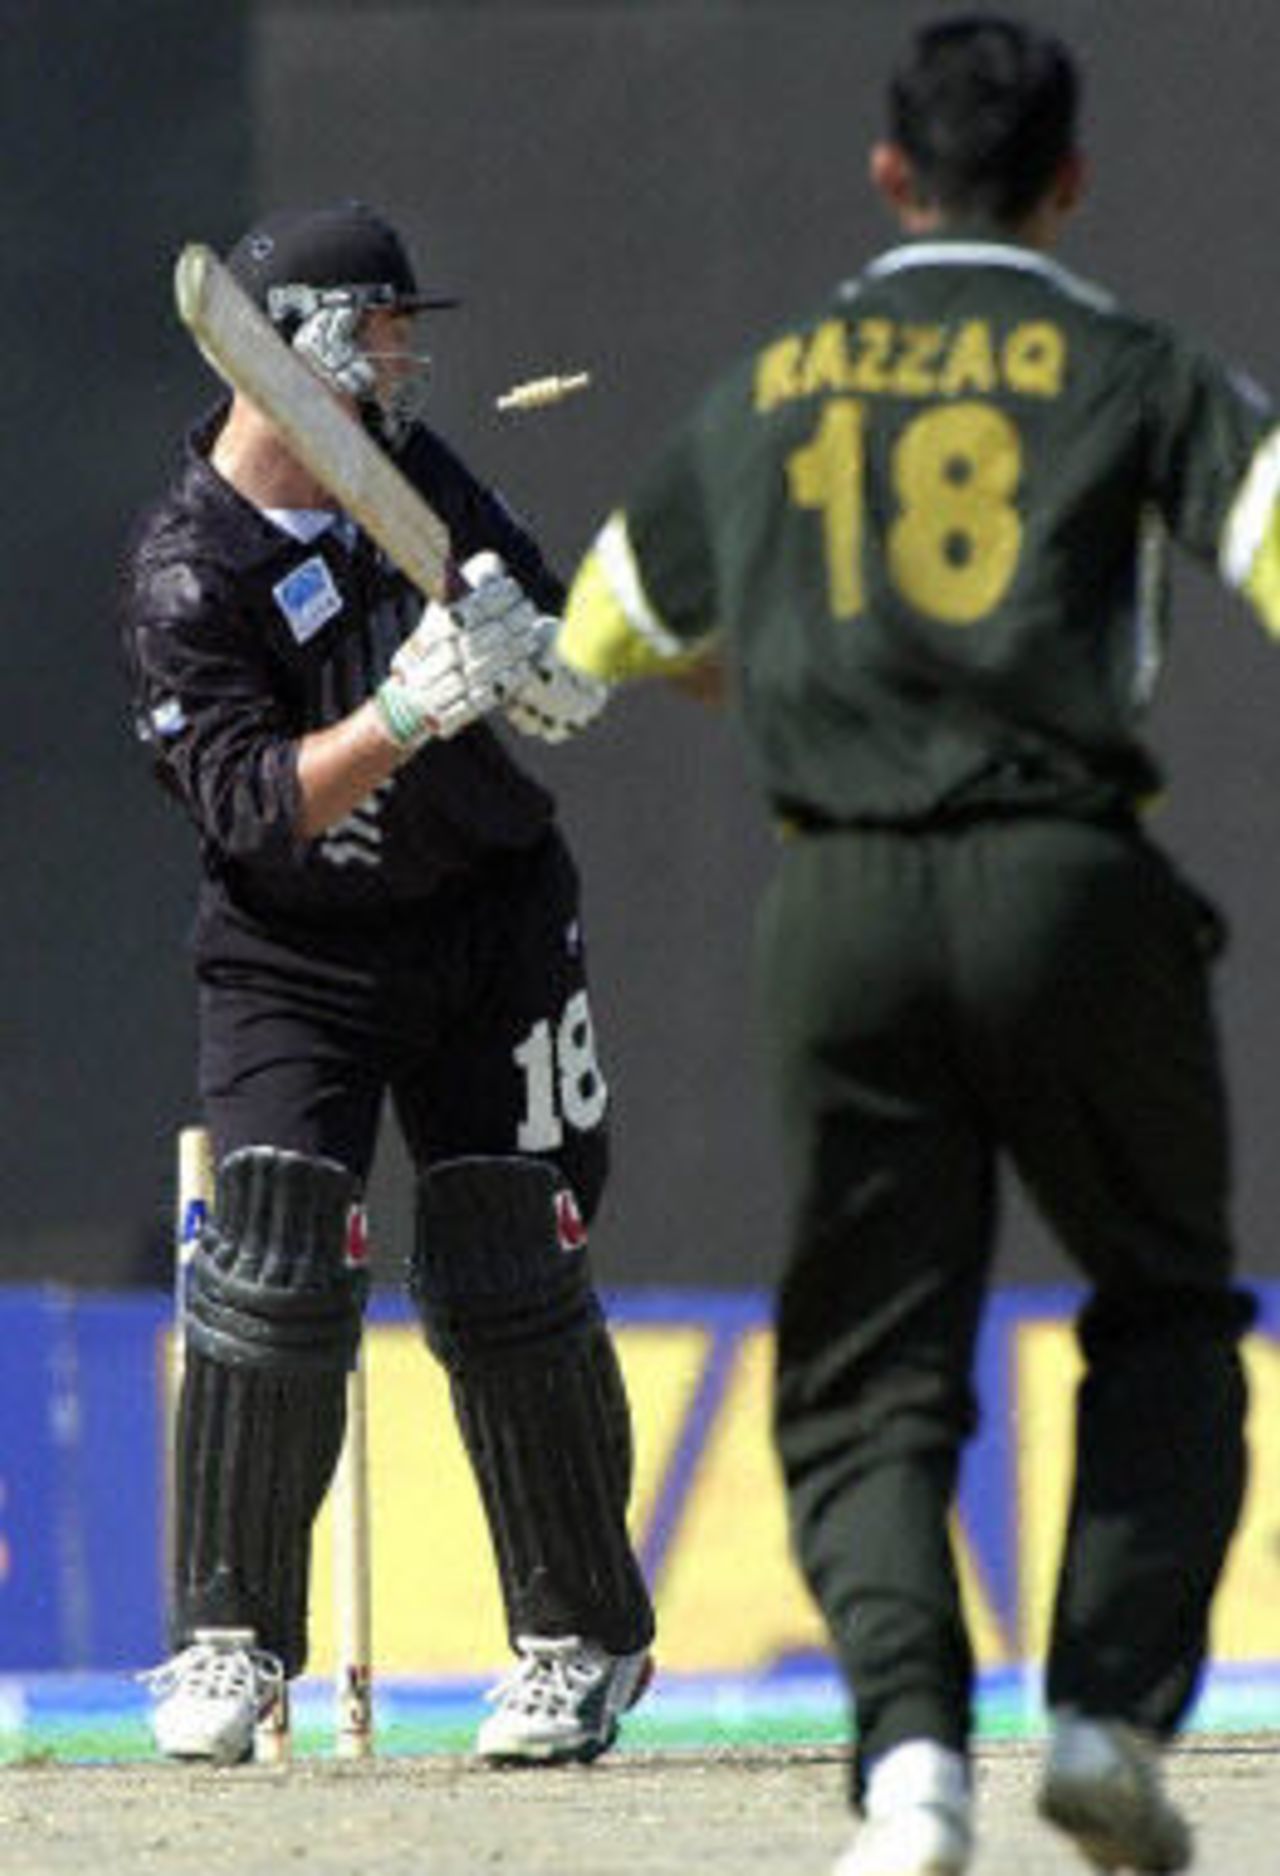 Matthew Sinclair faces his shattered stumps after being clean bowled  by Abdur Razzaq, ODI5 at Sharjah, New Zealand v Pakistan, 15 April 2001